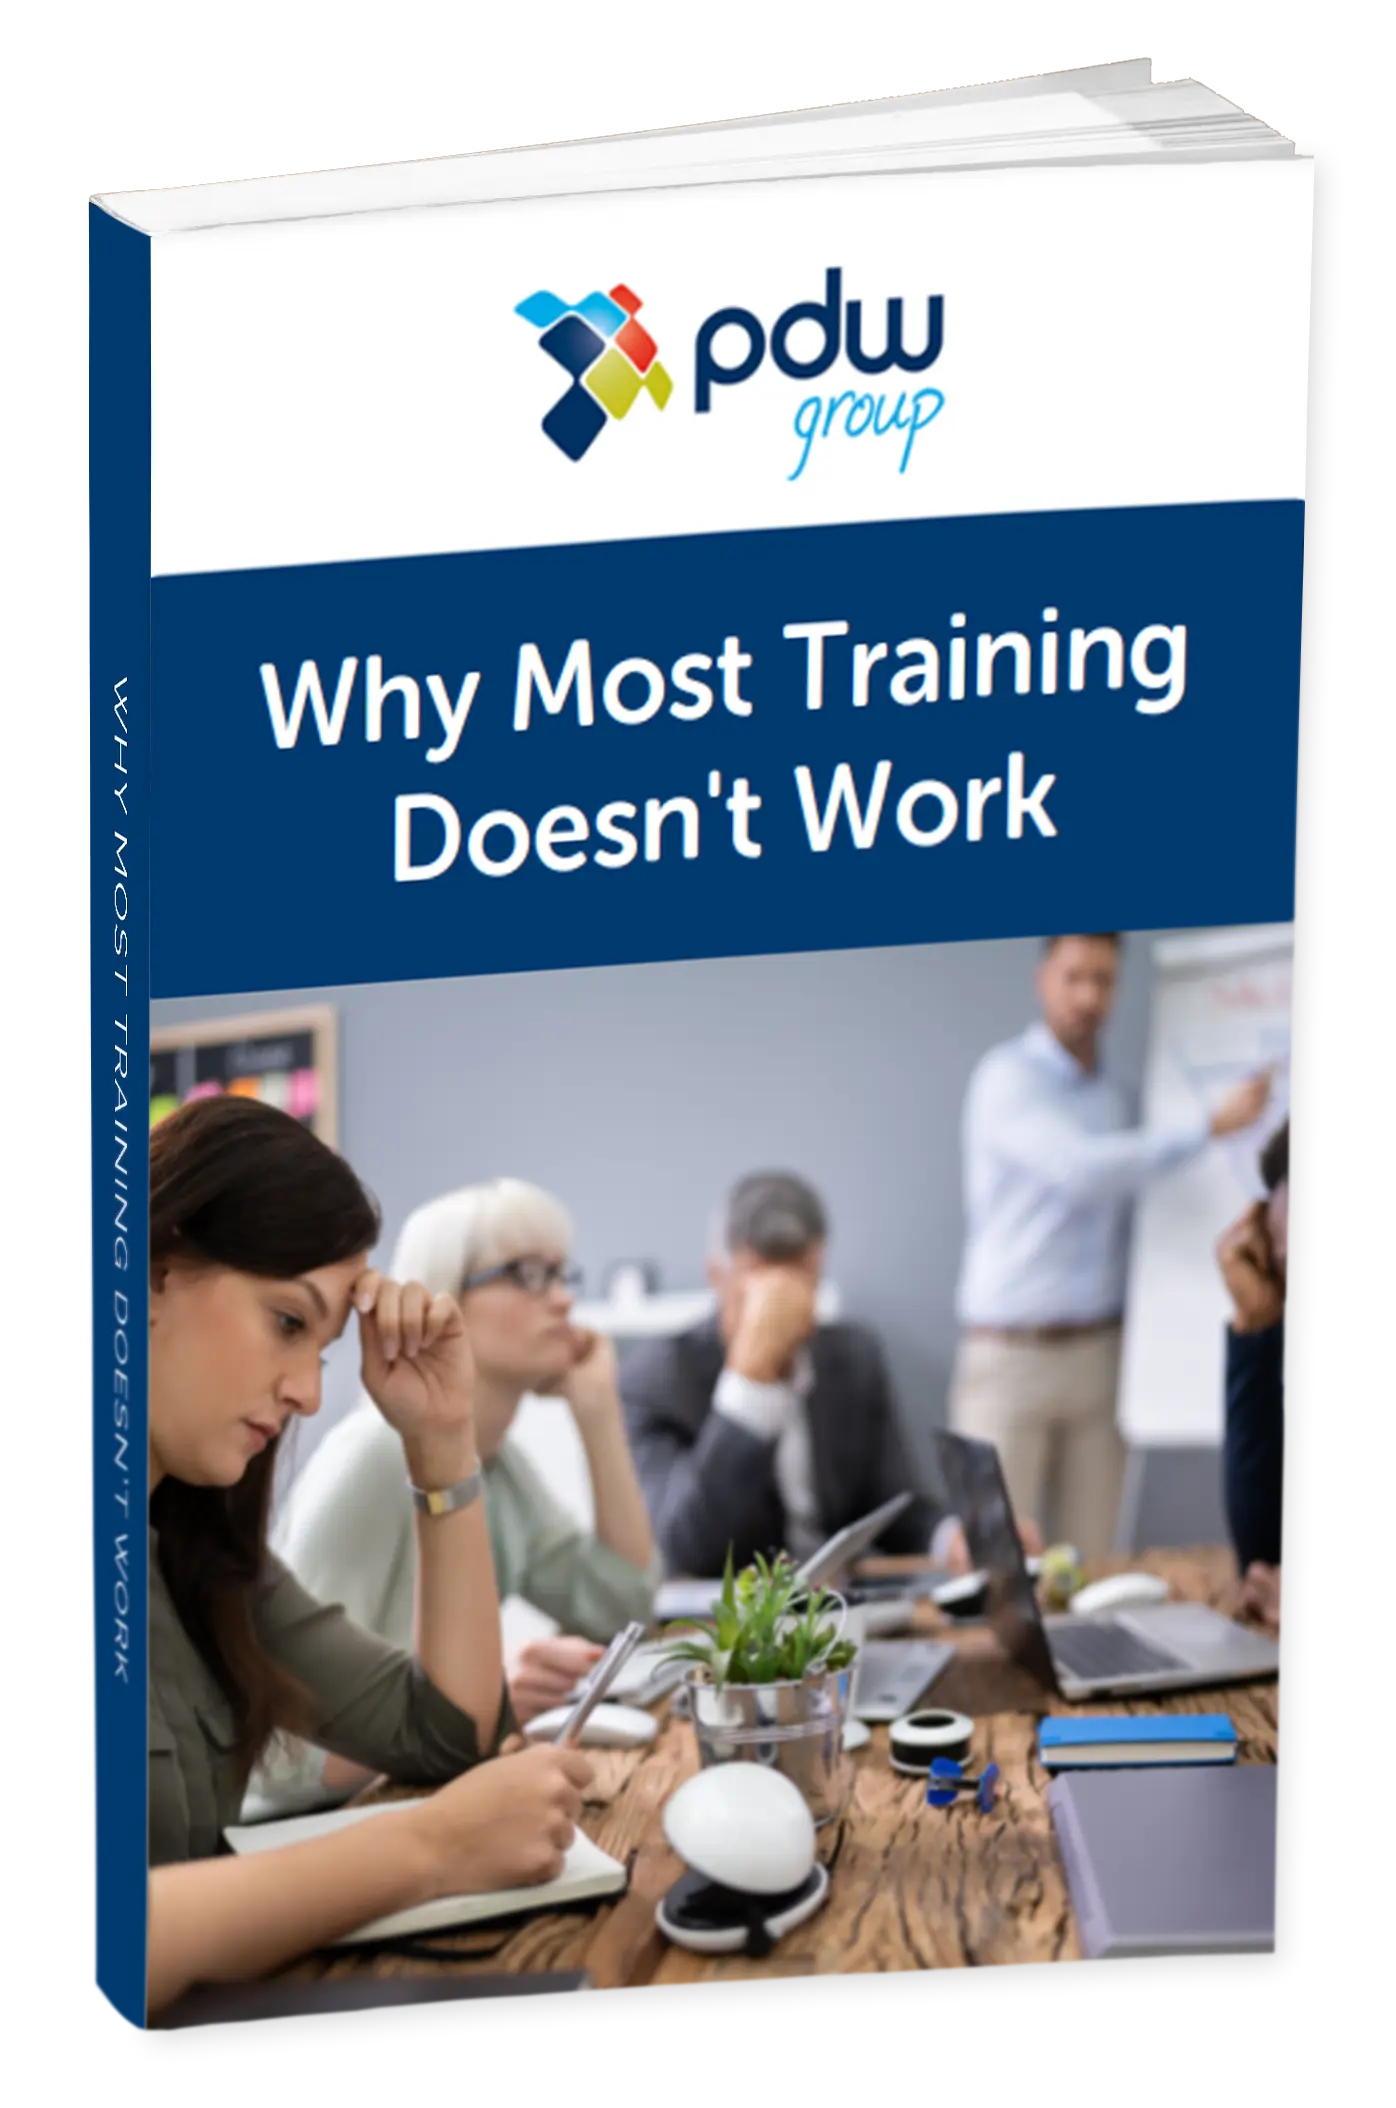 Free Guide On Why Most Training Doesn’t Work!